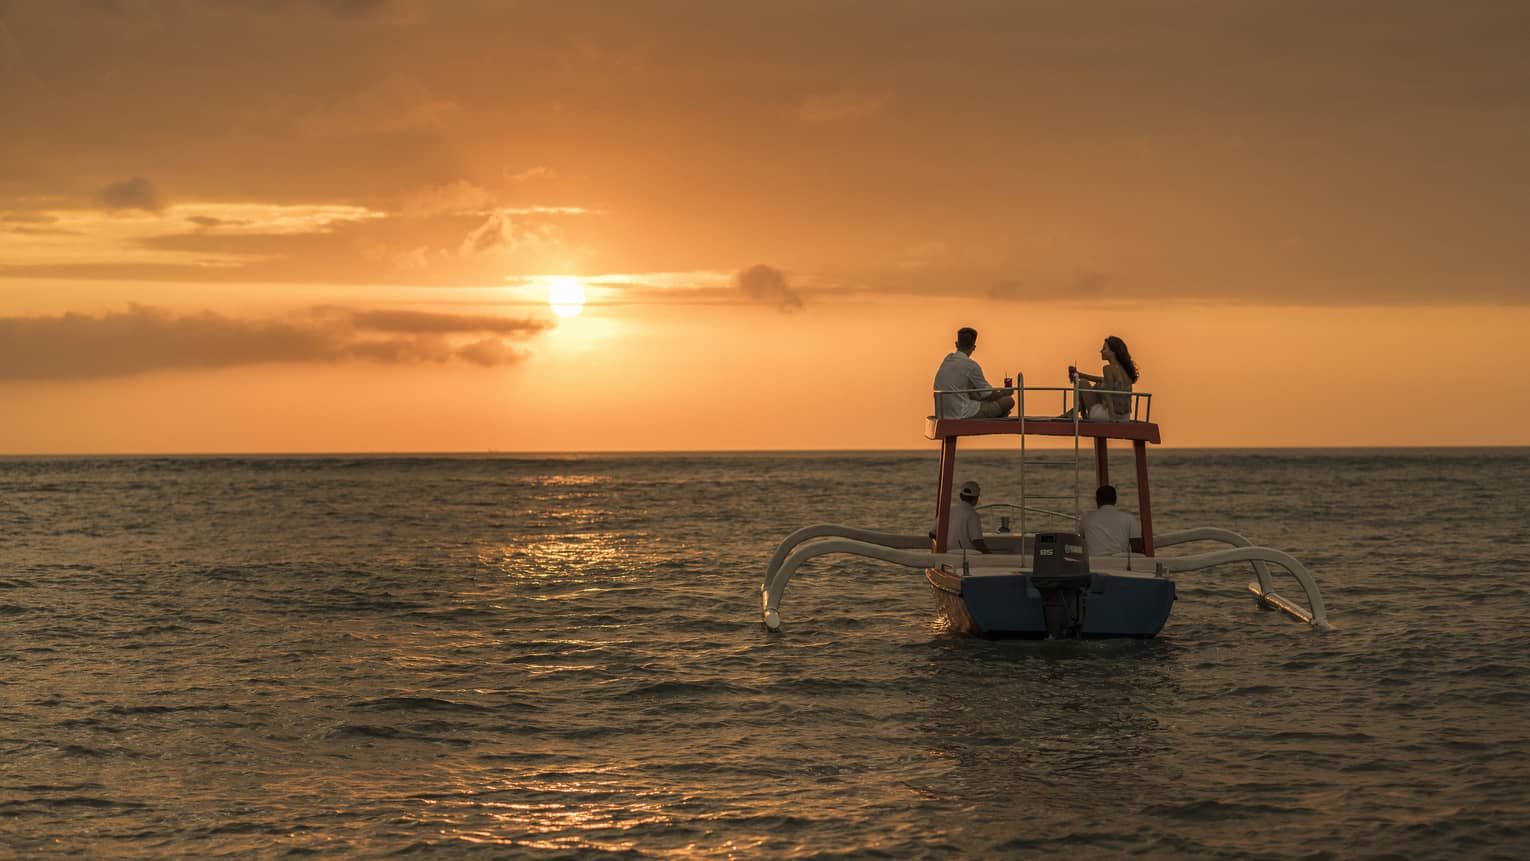 Couple sits on roof of boat sailing on ocean at sunset